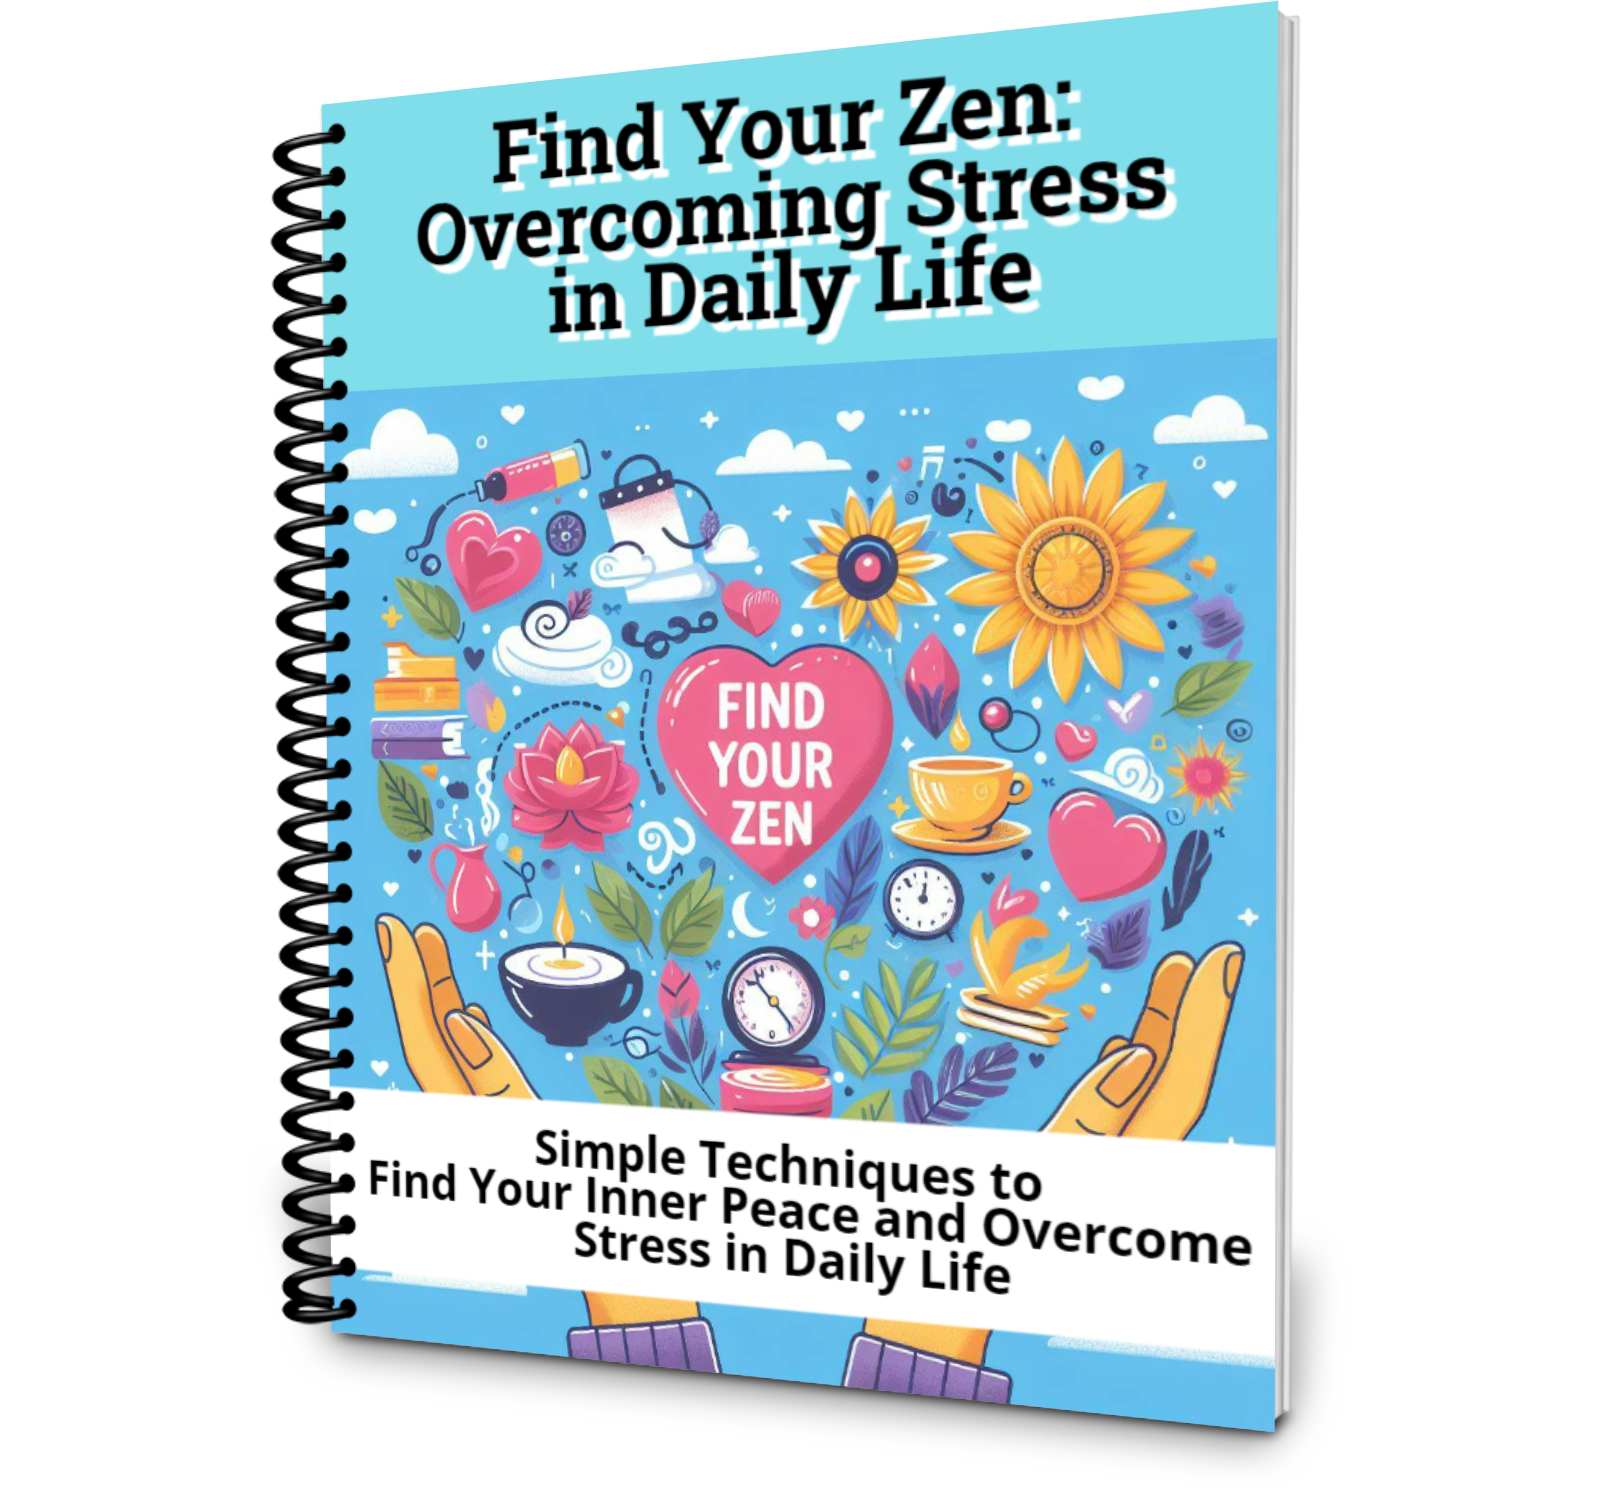 66508d2dcef02_Find_Your_Zen__Overcoming_Stress_in_Daily_Life.png